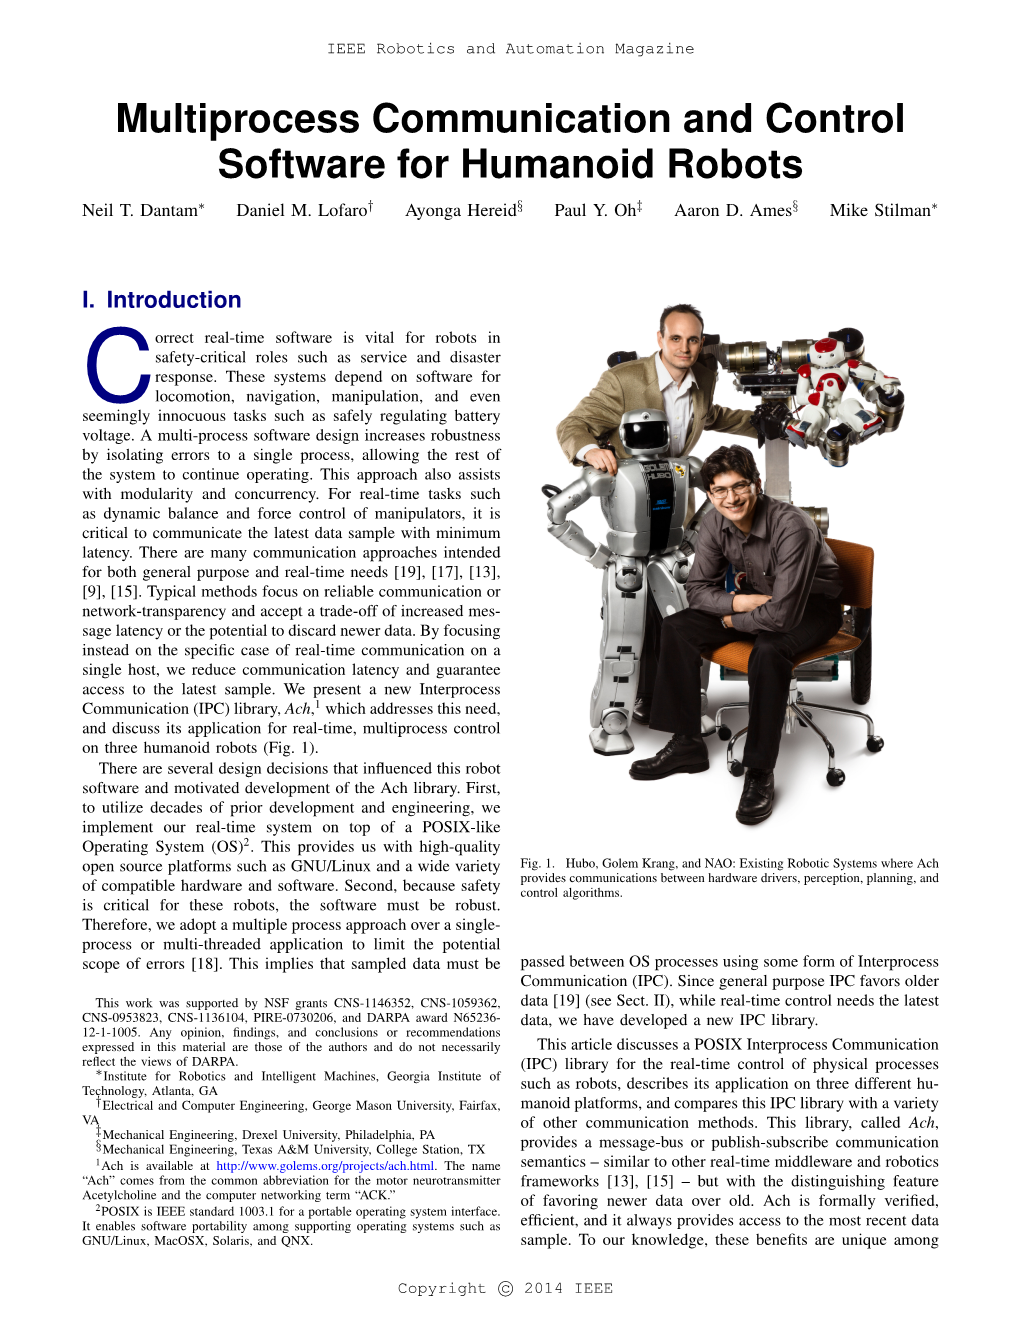 Multiprocess Communication and Control Software for Humanoid Robots Neil T